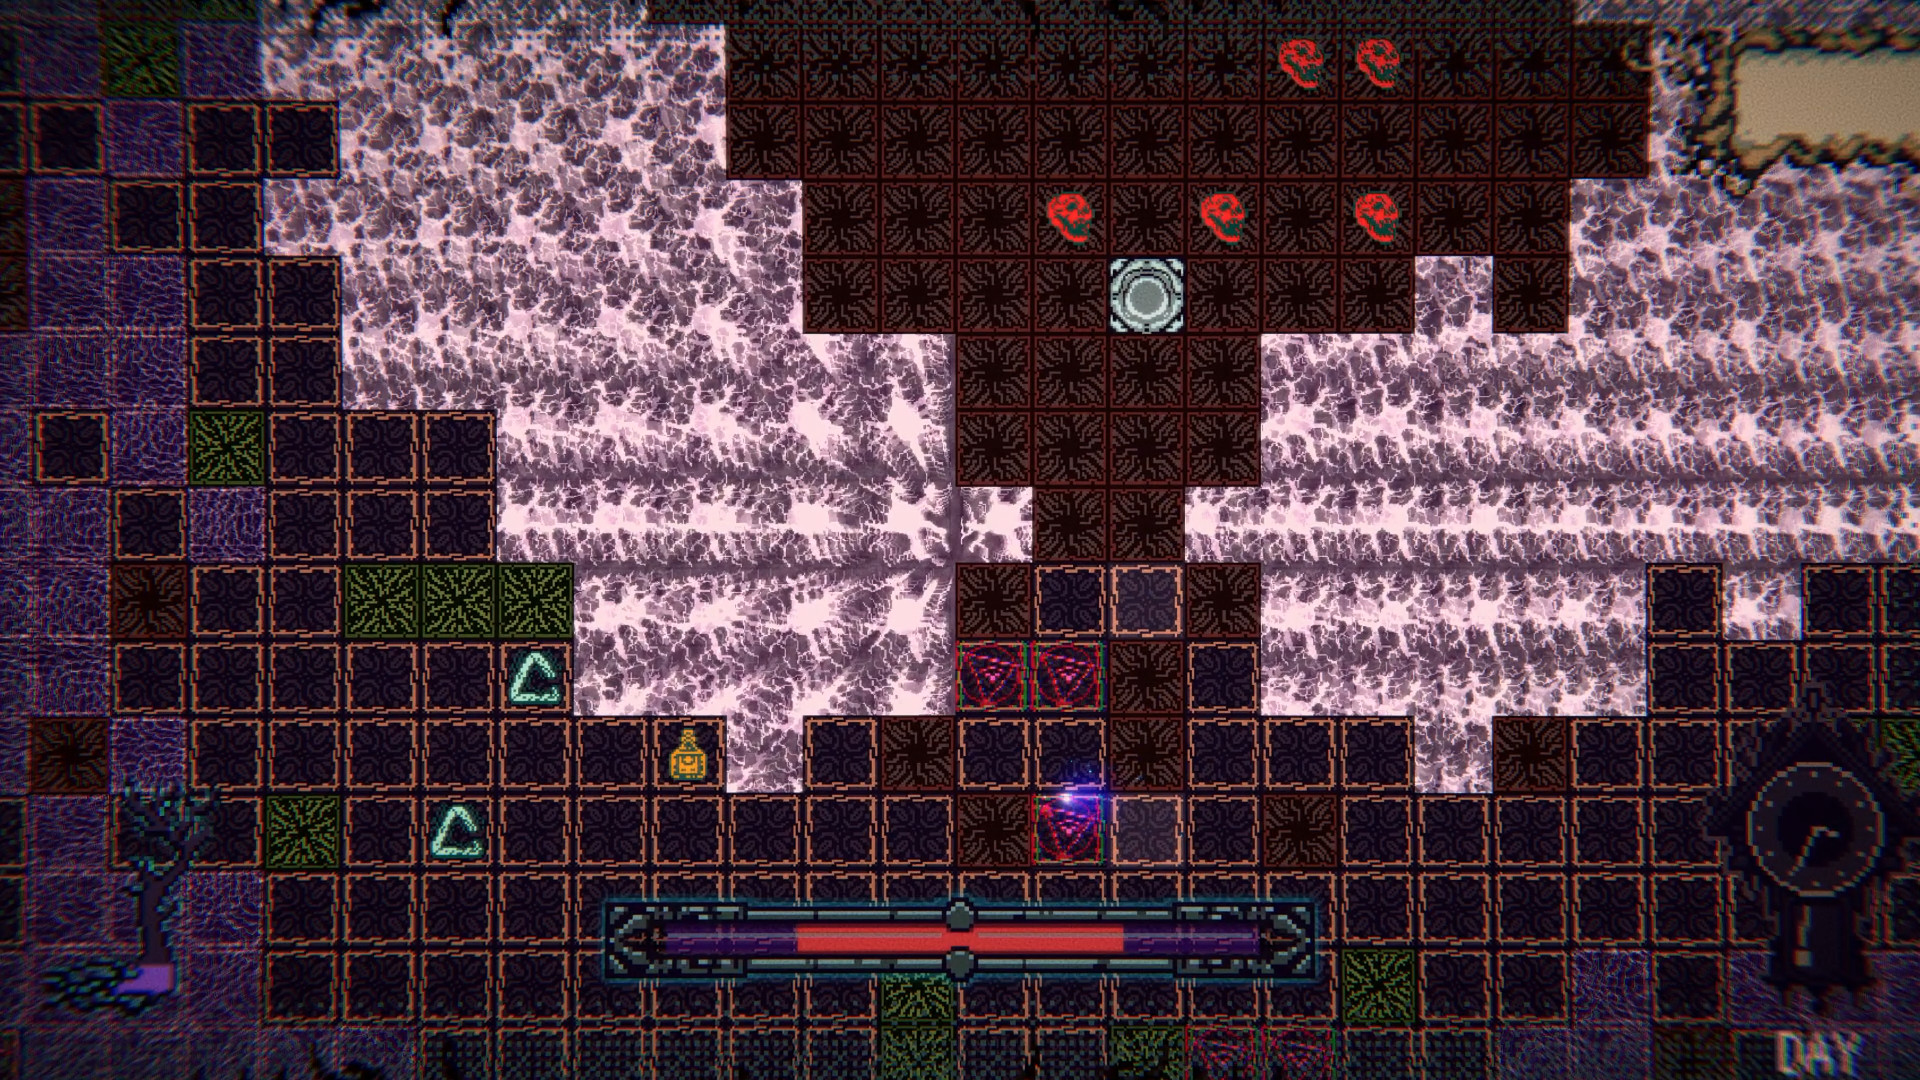 https://store.steampowered.com/app/1507790/Witch_Strandings/ - a ball of light flits around an array of multicolored tiles